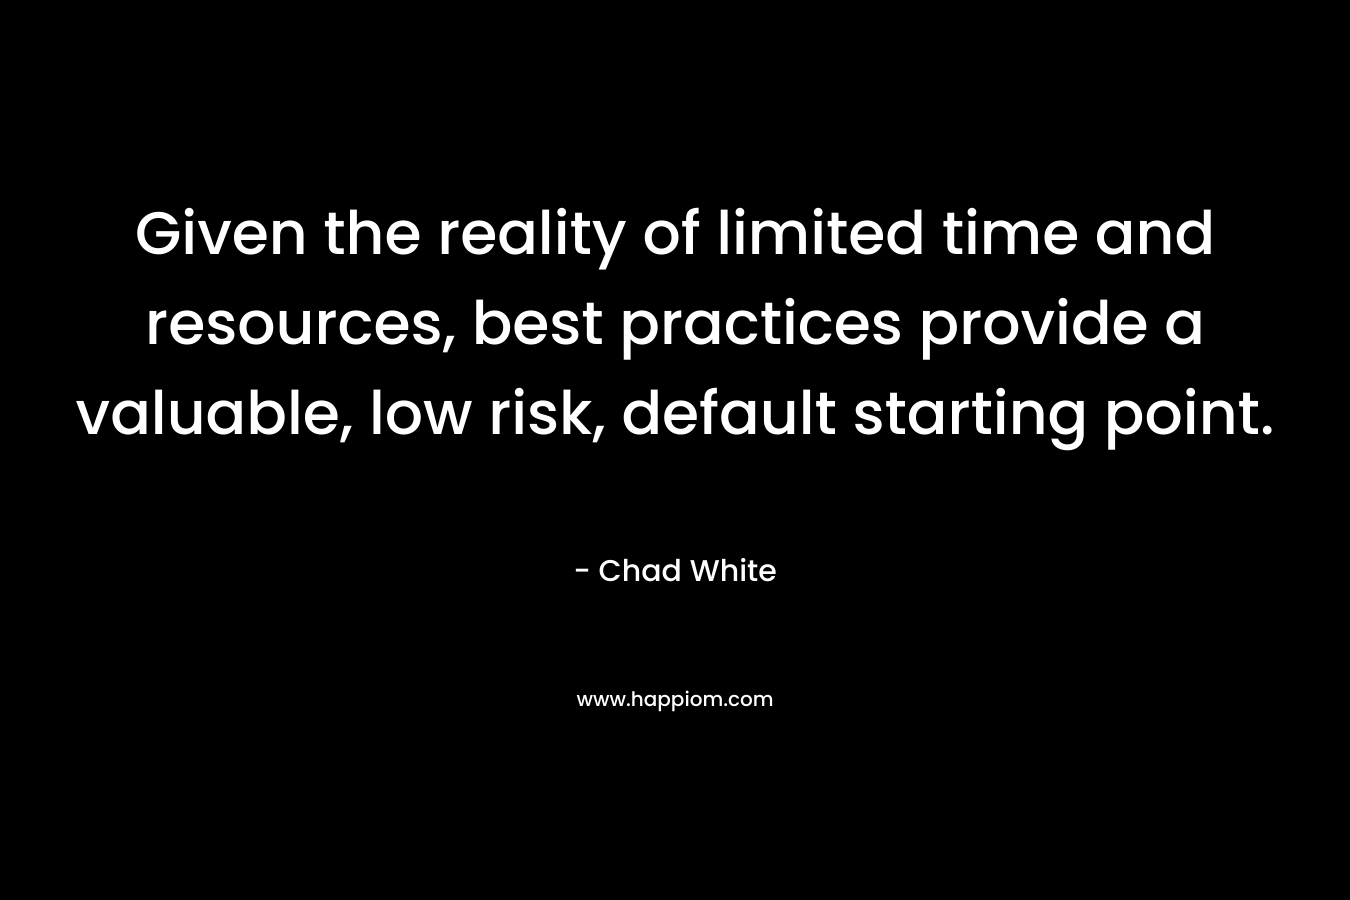 Given the reality of limited time and resources, best practices provide a valuable, low risk, default starting point.